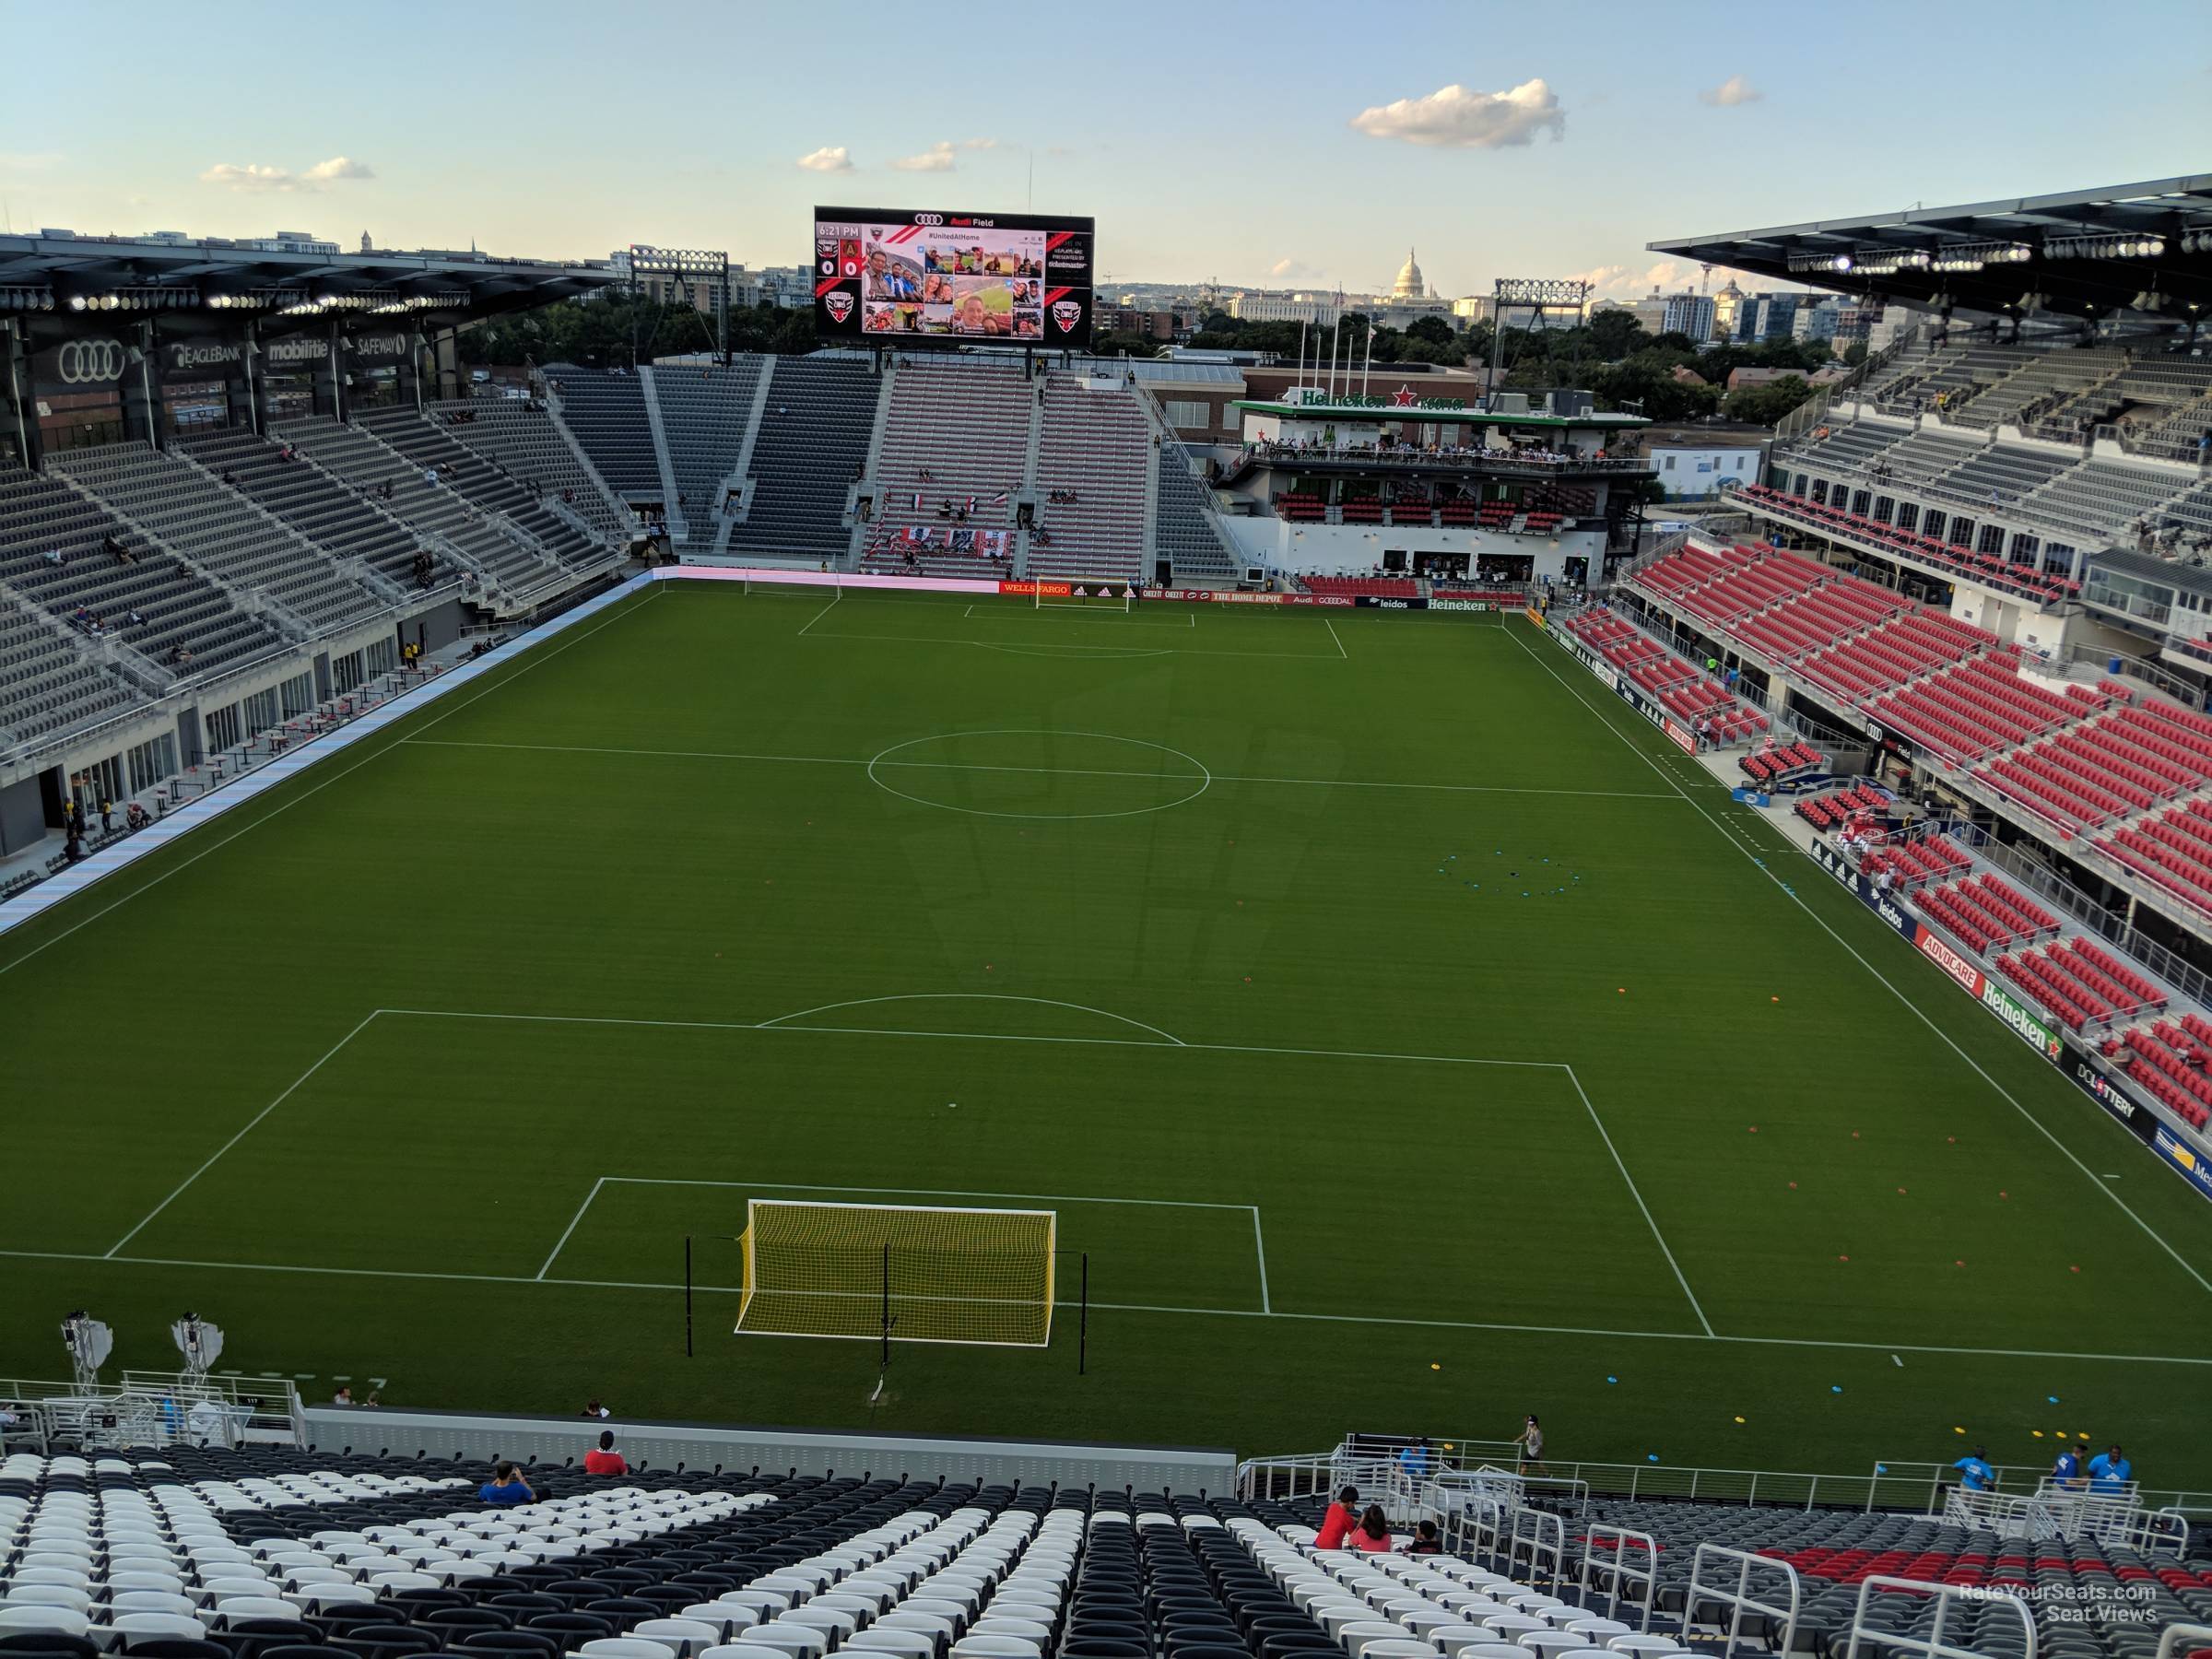 section 117, row 37 seat view  - audi field